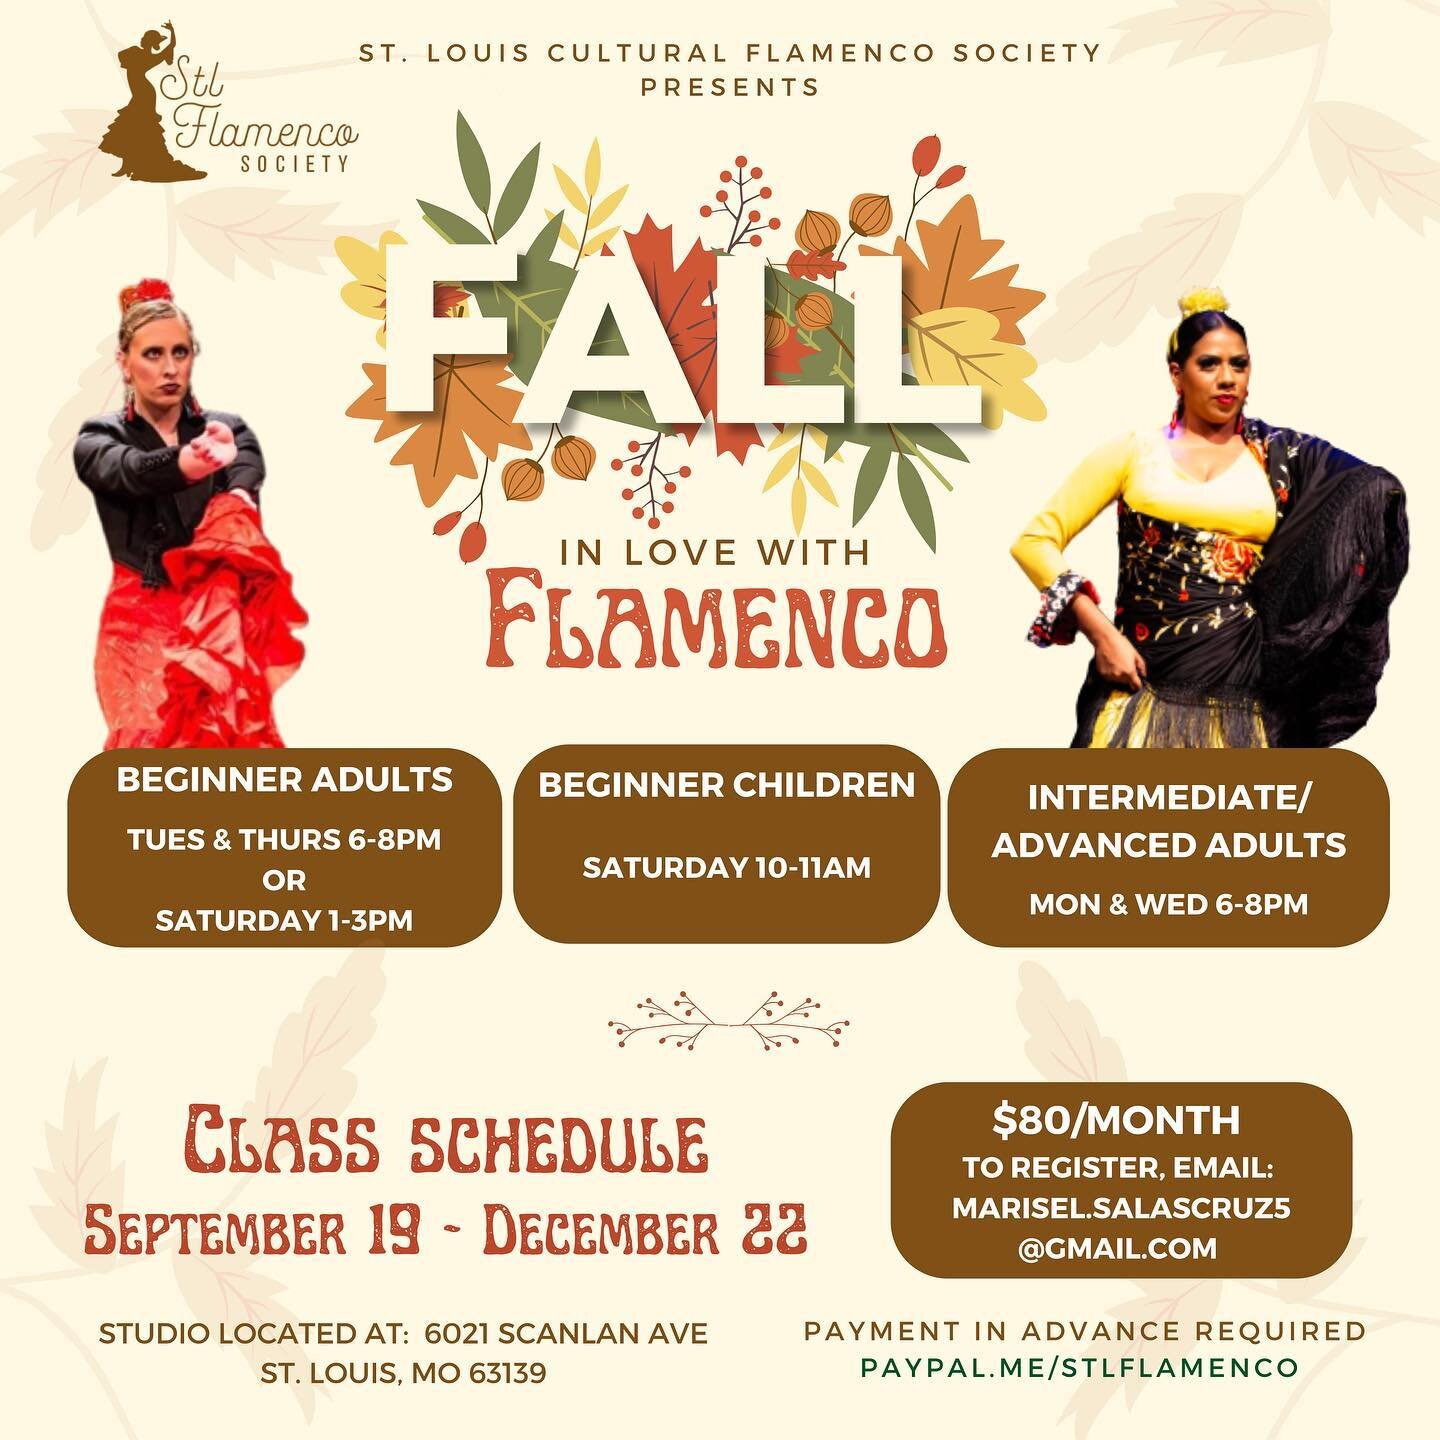 Join us for our fall course! To register, email marisel.salascruz5@gmail.com! Payments may be sent to our PayPal at PayPal.me/stlflamenco. 💃